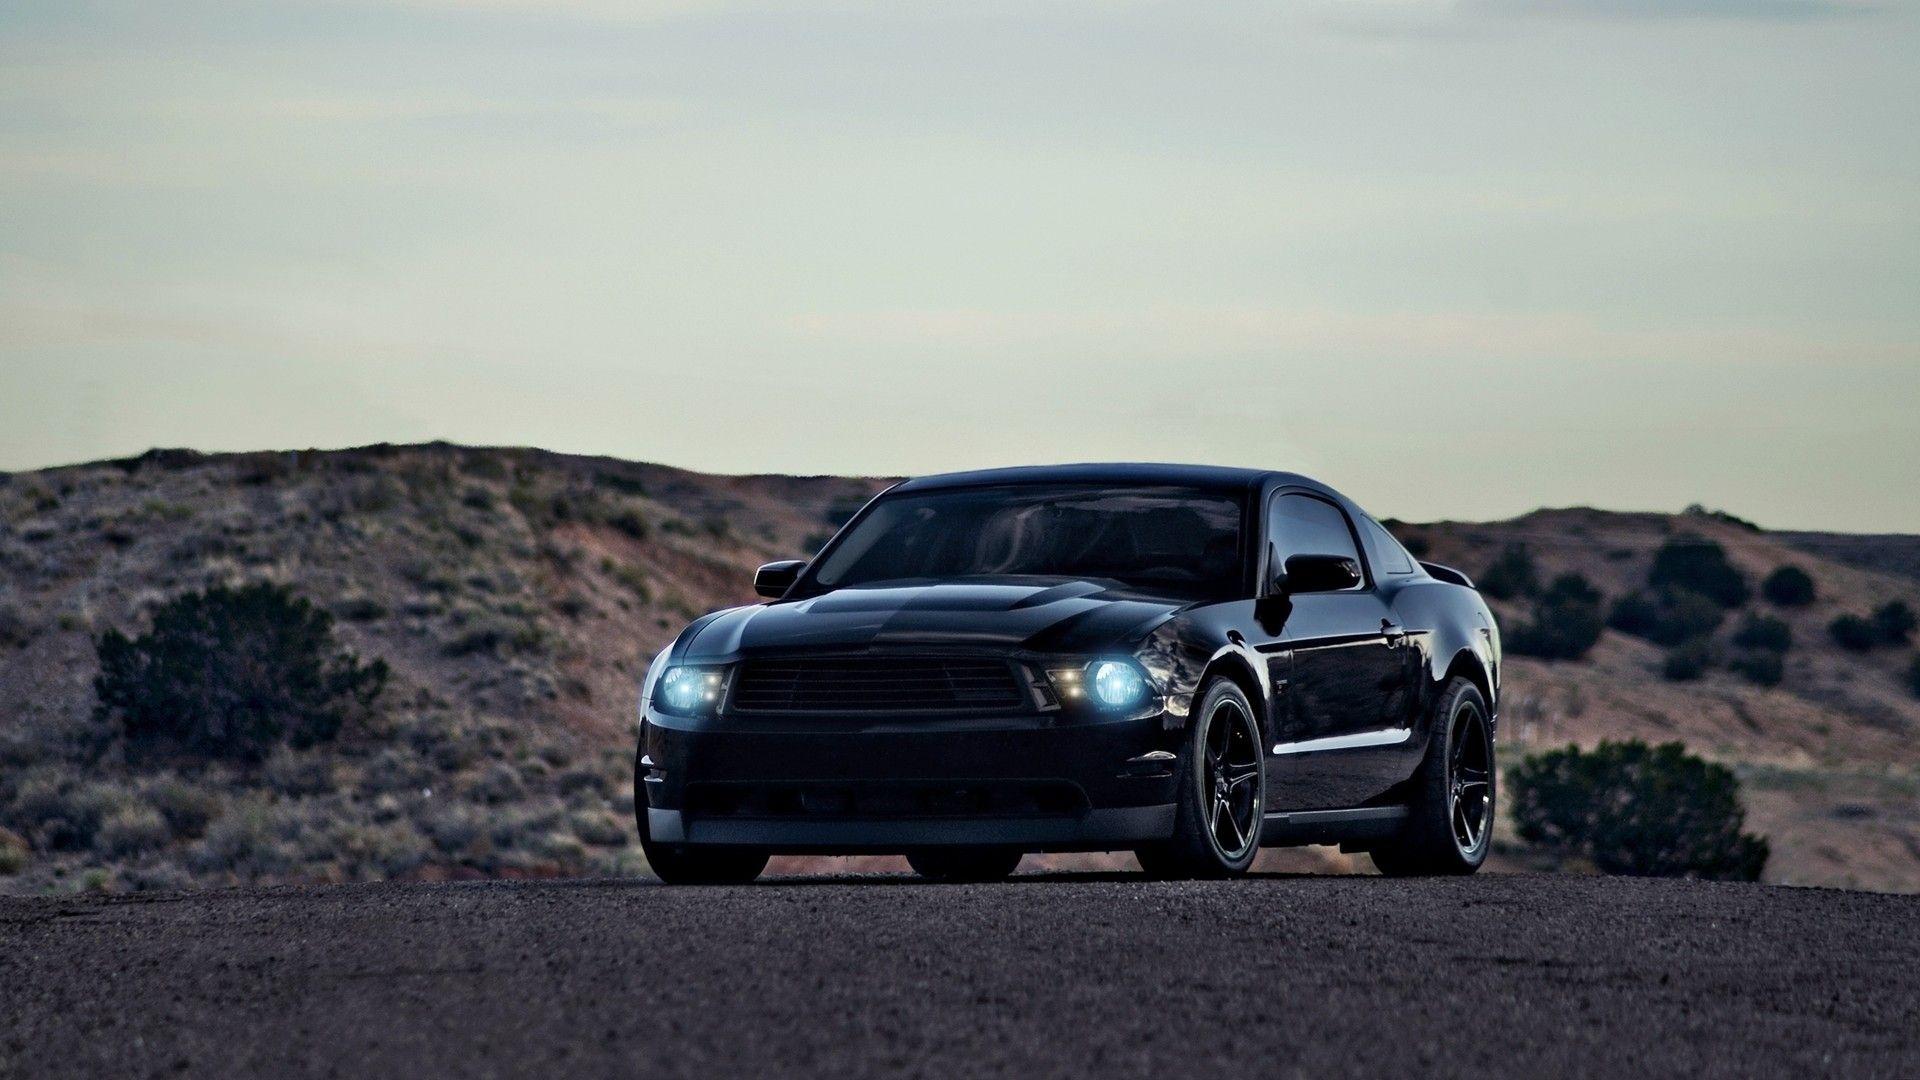 blue, black, cars, Ford, roads, vehicles, Ford Mustang, Shelby